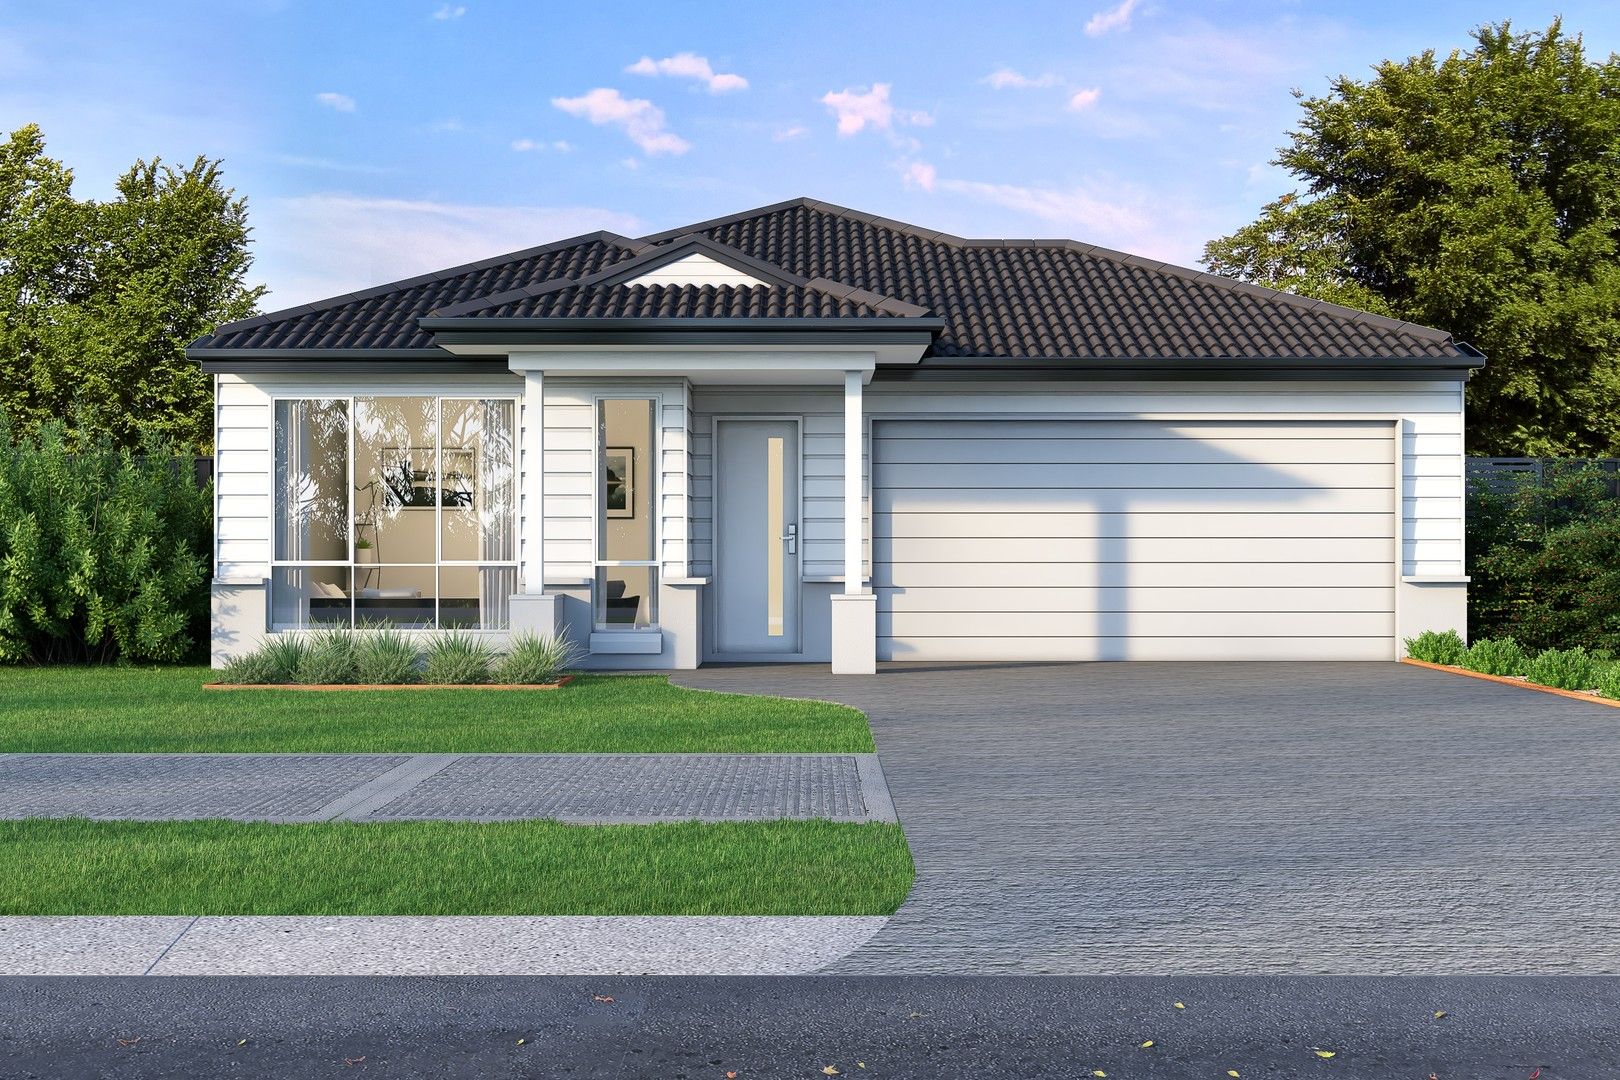 4 bedrooms New House & Land in 1312 Carradale Road CLYDE NORTH VIC, 3978